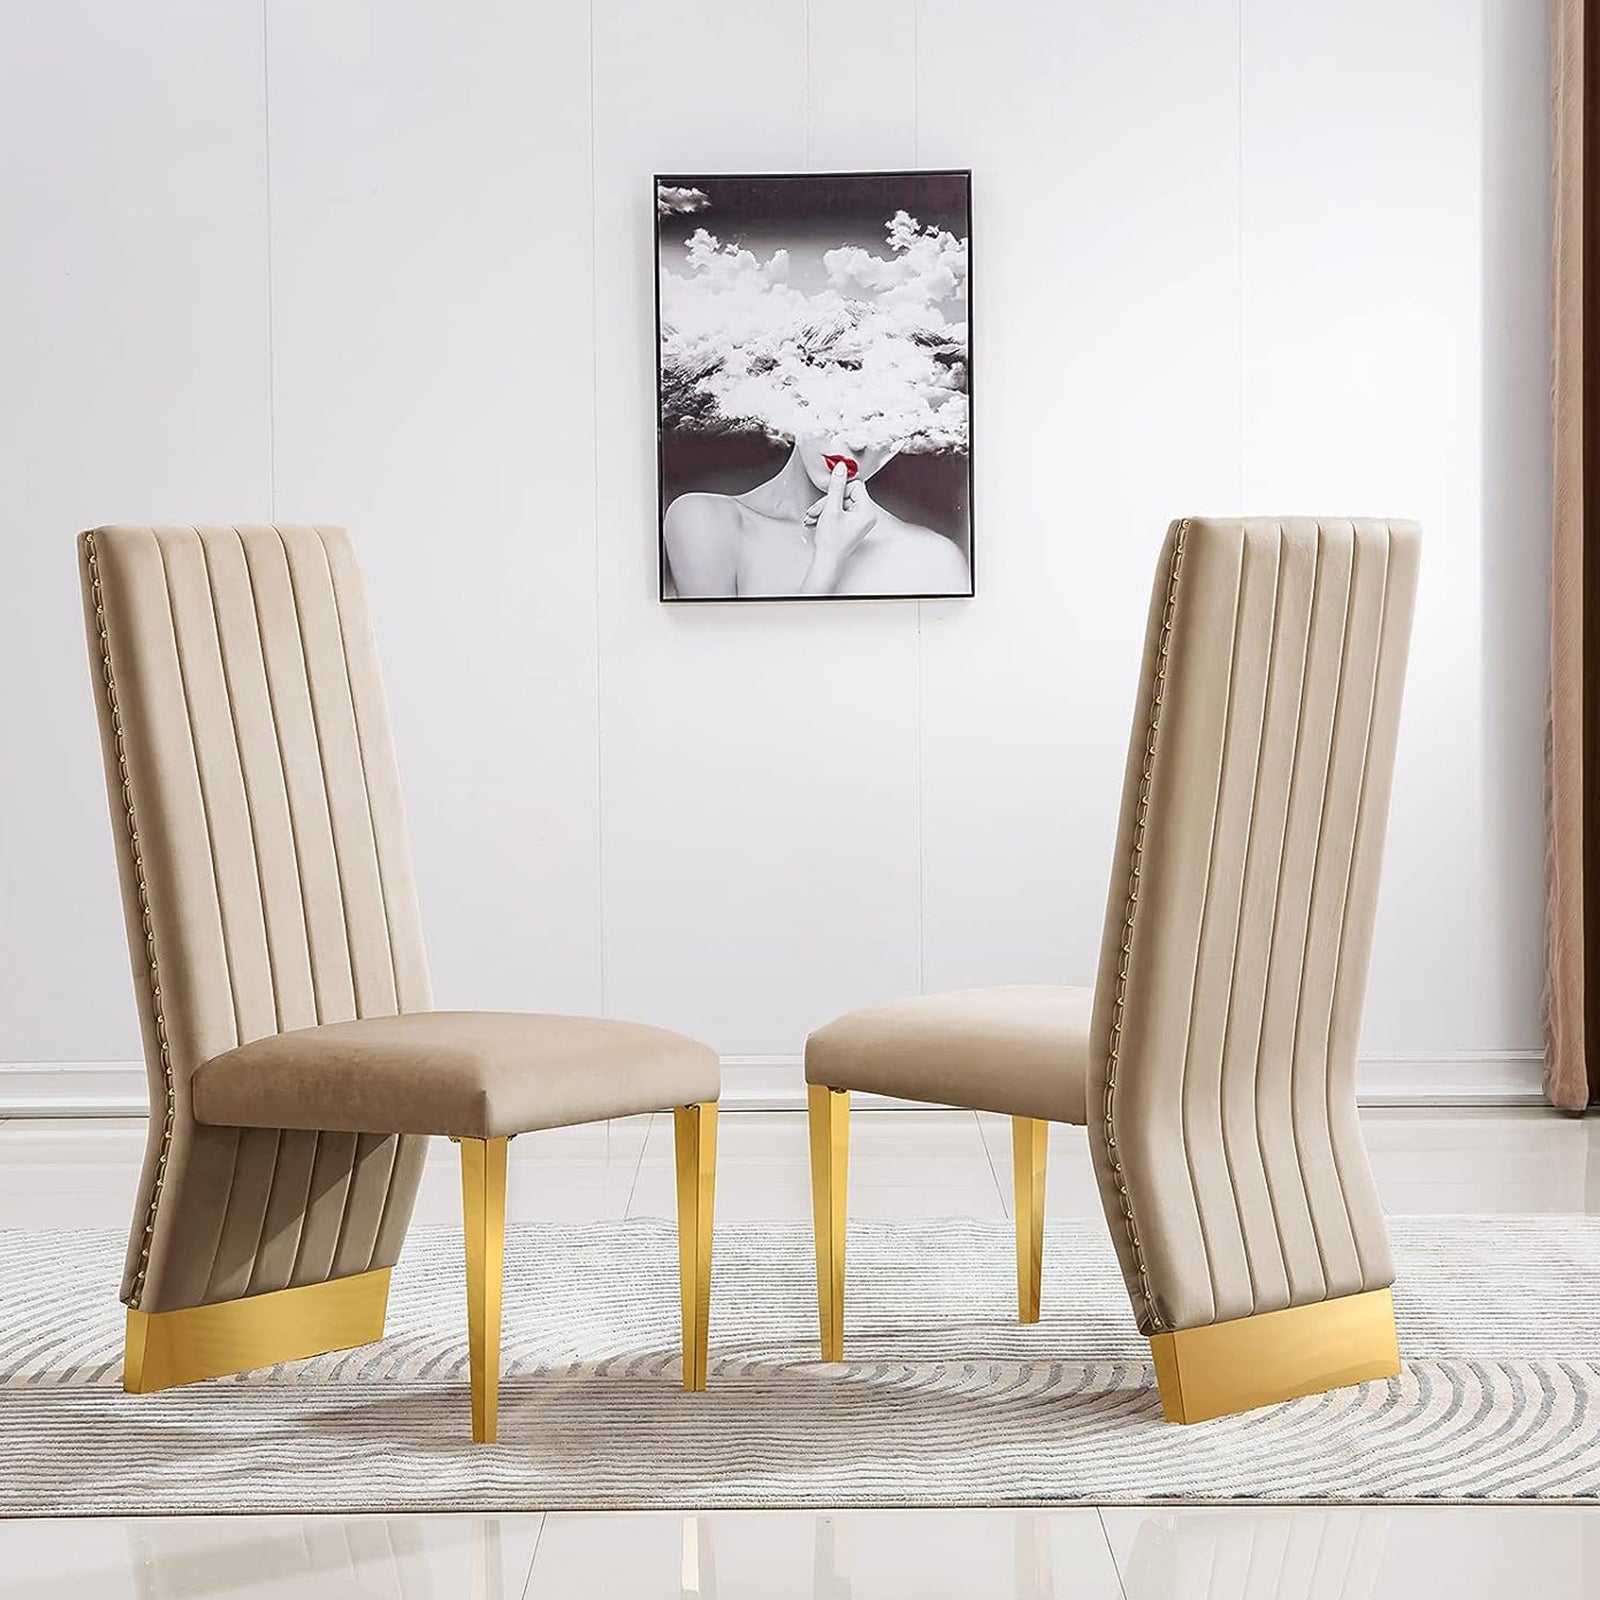 677-Set | AUZ White and Gold Dining room Sets for 6